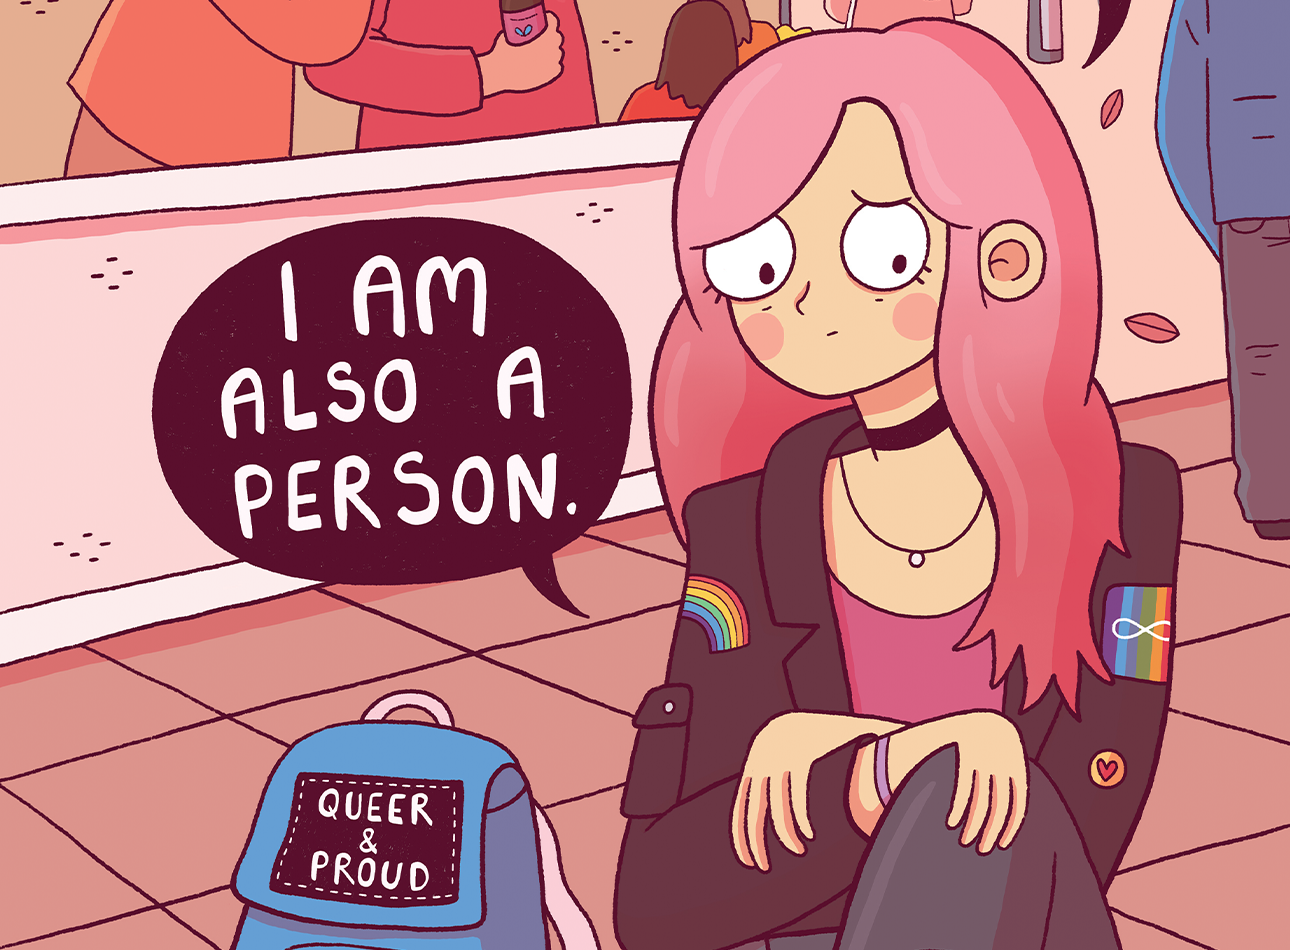 Pink toned graphic that reads 'Yes I am autistic. Yes I am transgender. I am also a person.' The image is of a girl with pink hair looking embarrassed as 2 people whisper behind her.